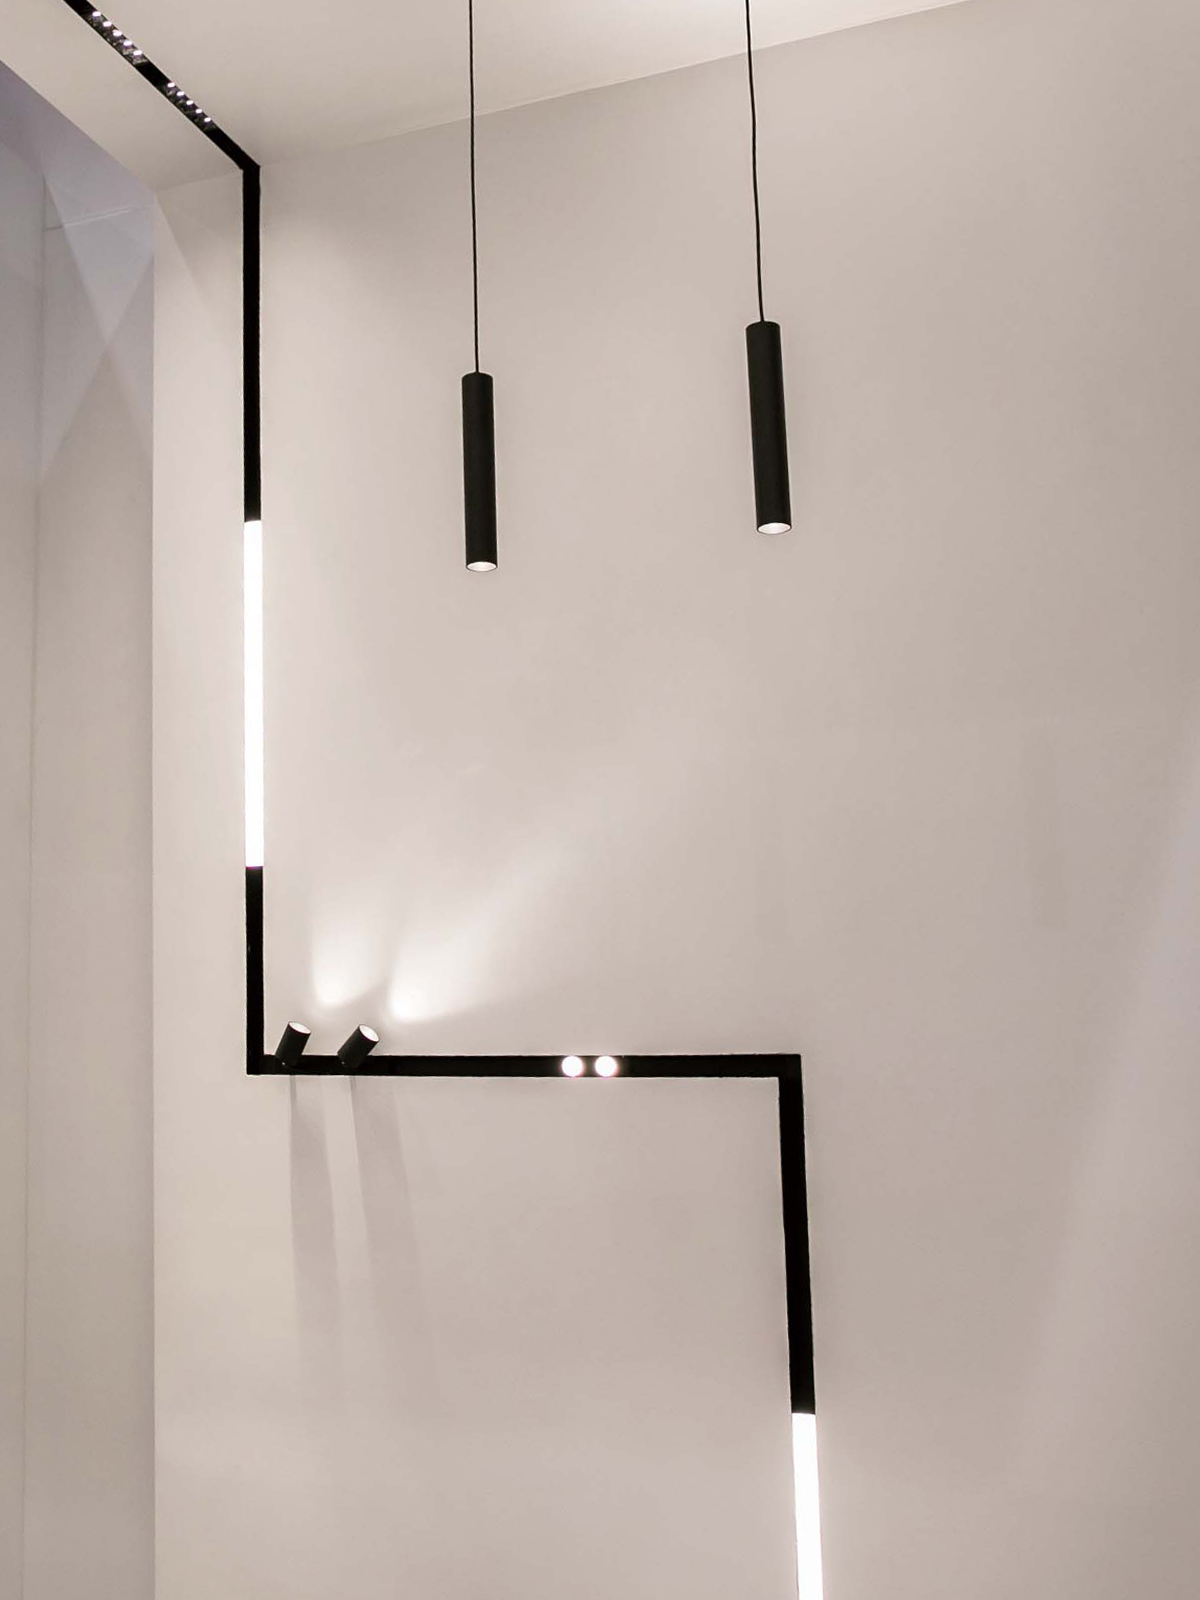 DLD Shadowline recessed track with right angle joints linking from the ceiling to the wall, using linear LED modules, spot lights, pendants and downlights